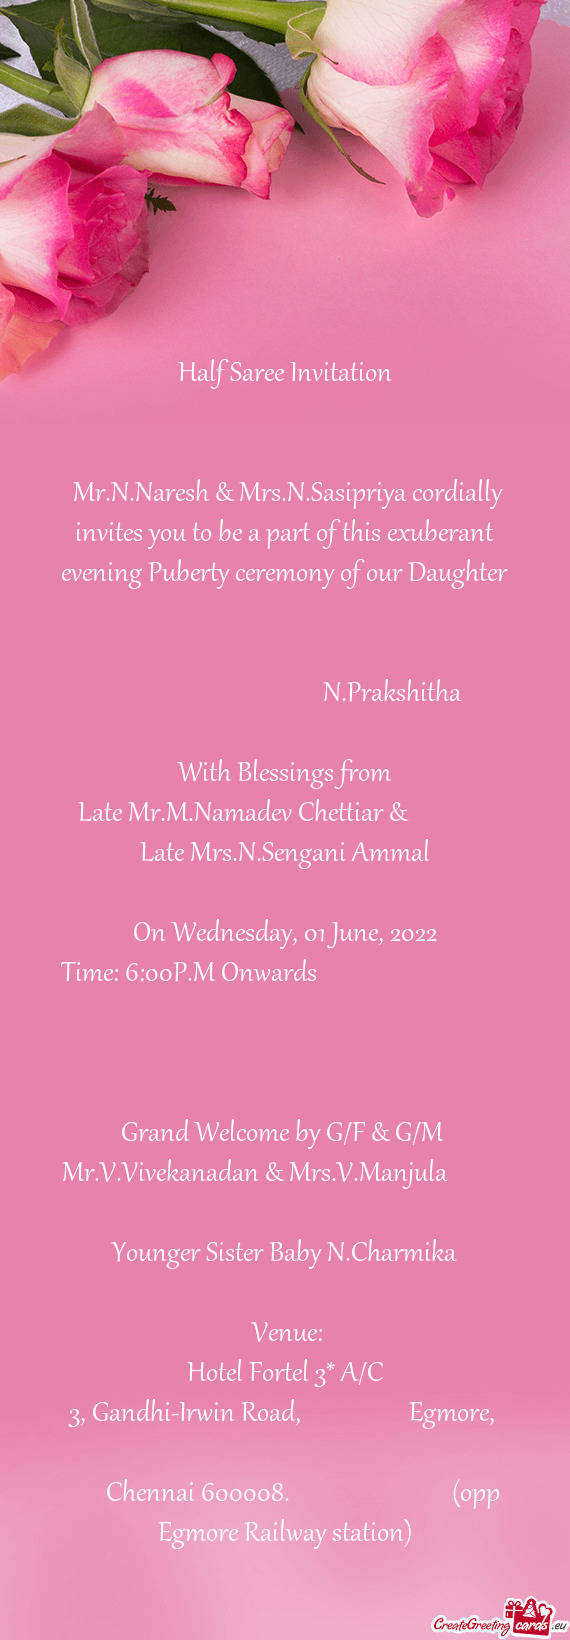 Mr.N.Naresh & Mrs.N.Sasipriya cordially invites you to be a part of this exuberant evening Puberty